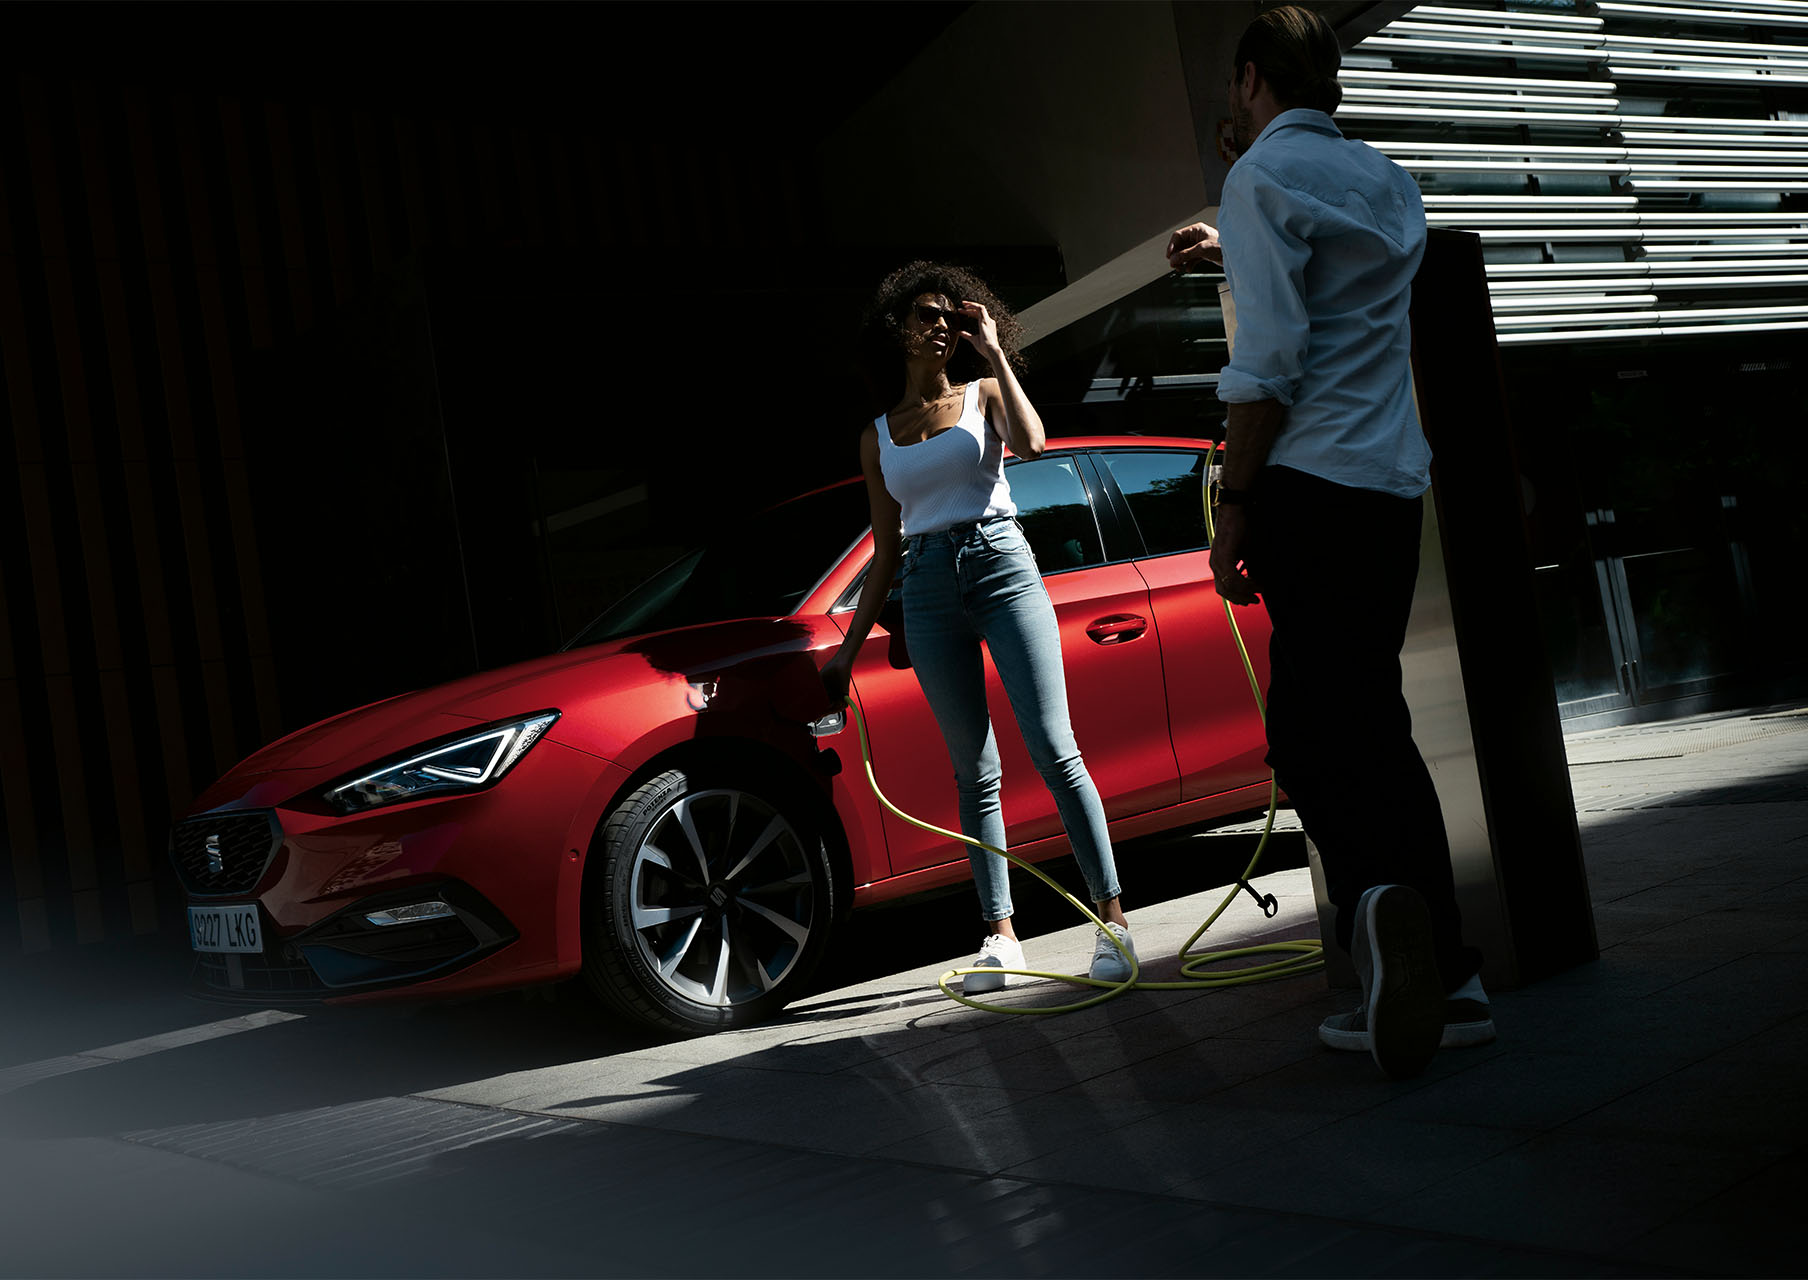 The SEAT Leon 5D FR displayed in a safety demonstration setting. The car is equipped with advanced safety features including adaptive cruise control, lane assist and emergency braking system.